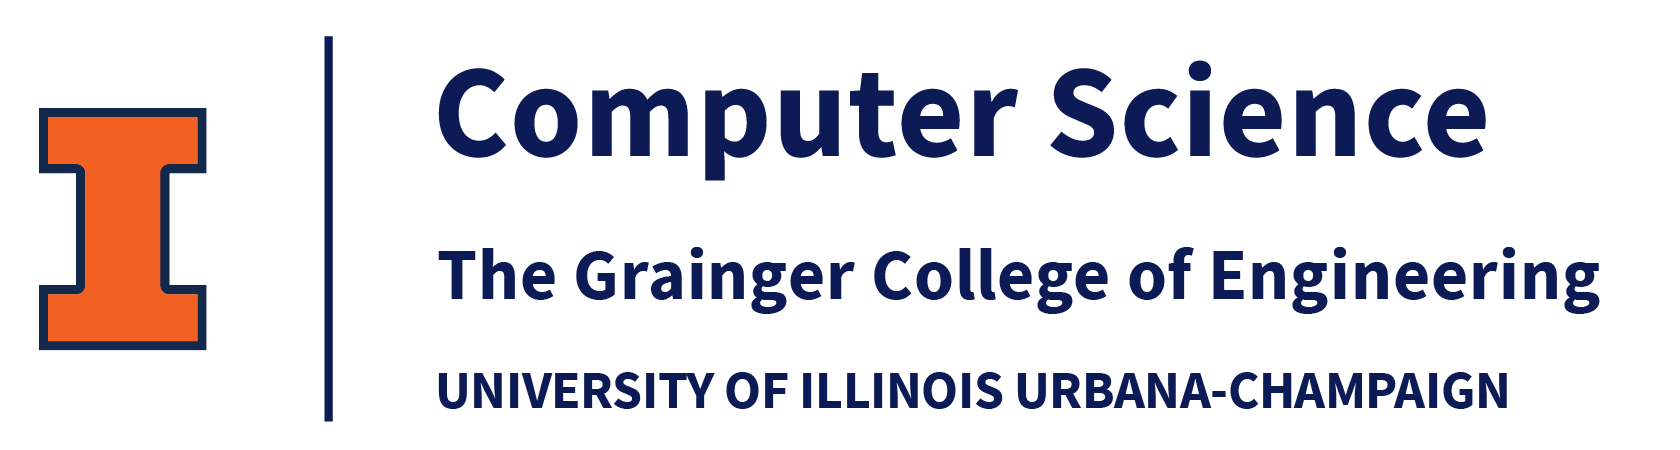 The University of Illinois, Department of Computer Science